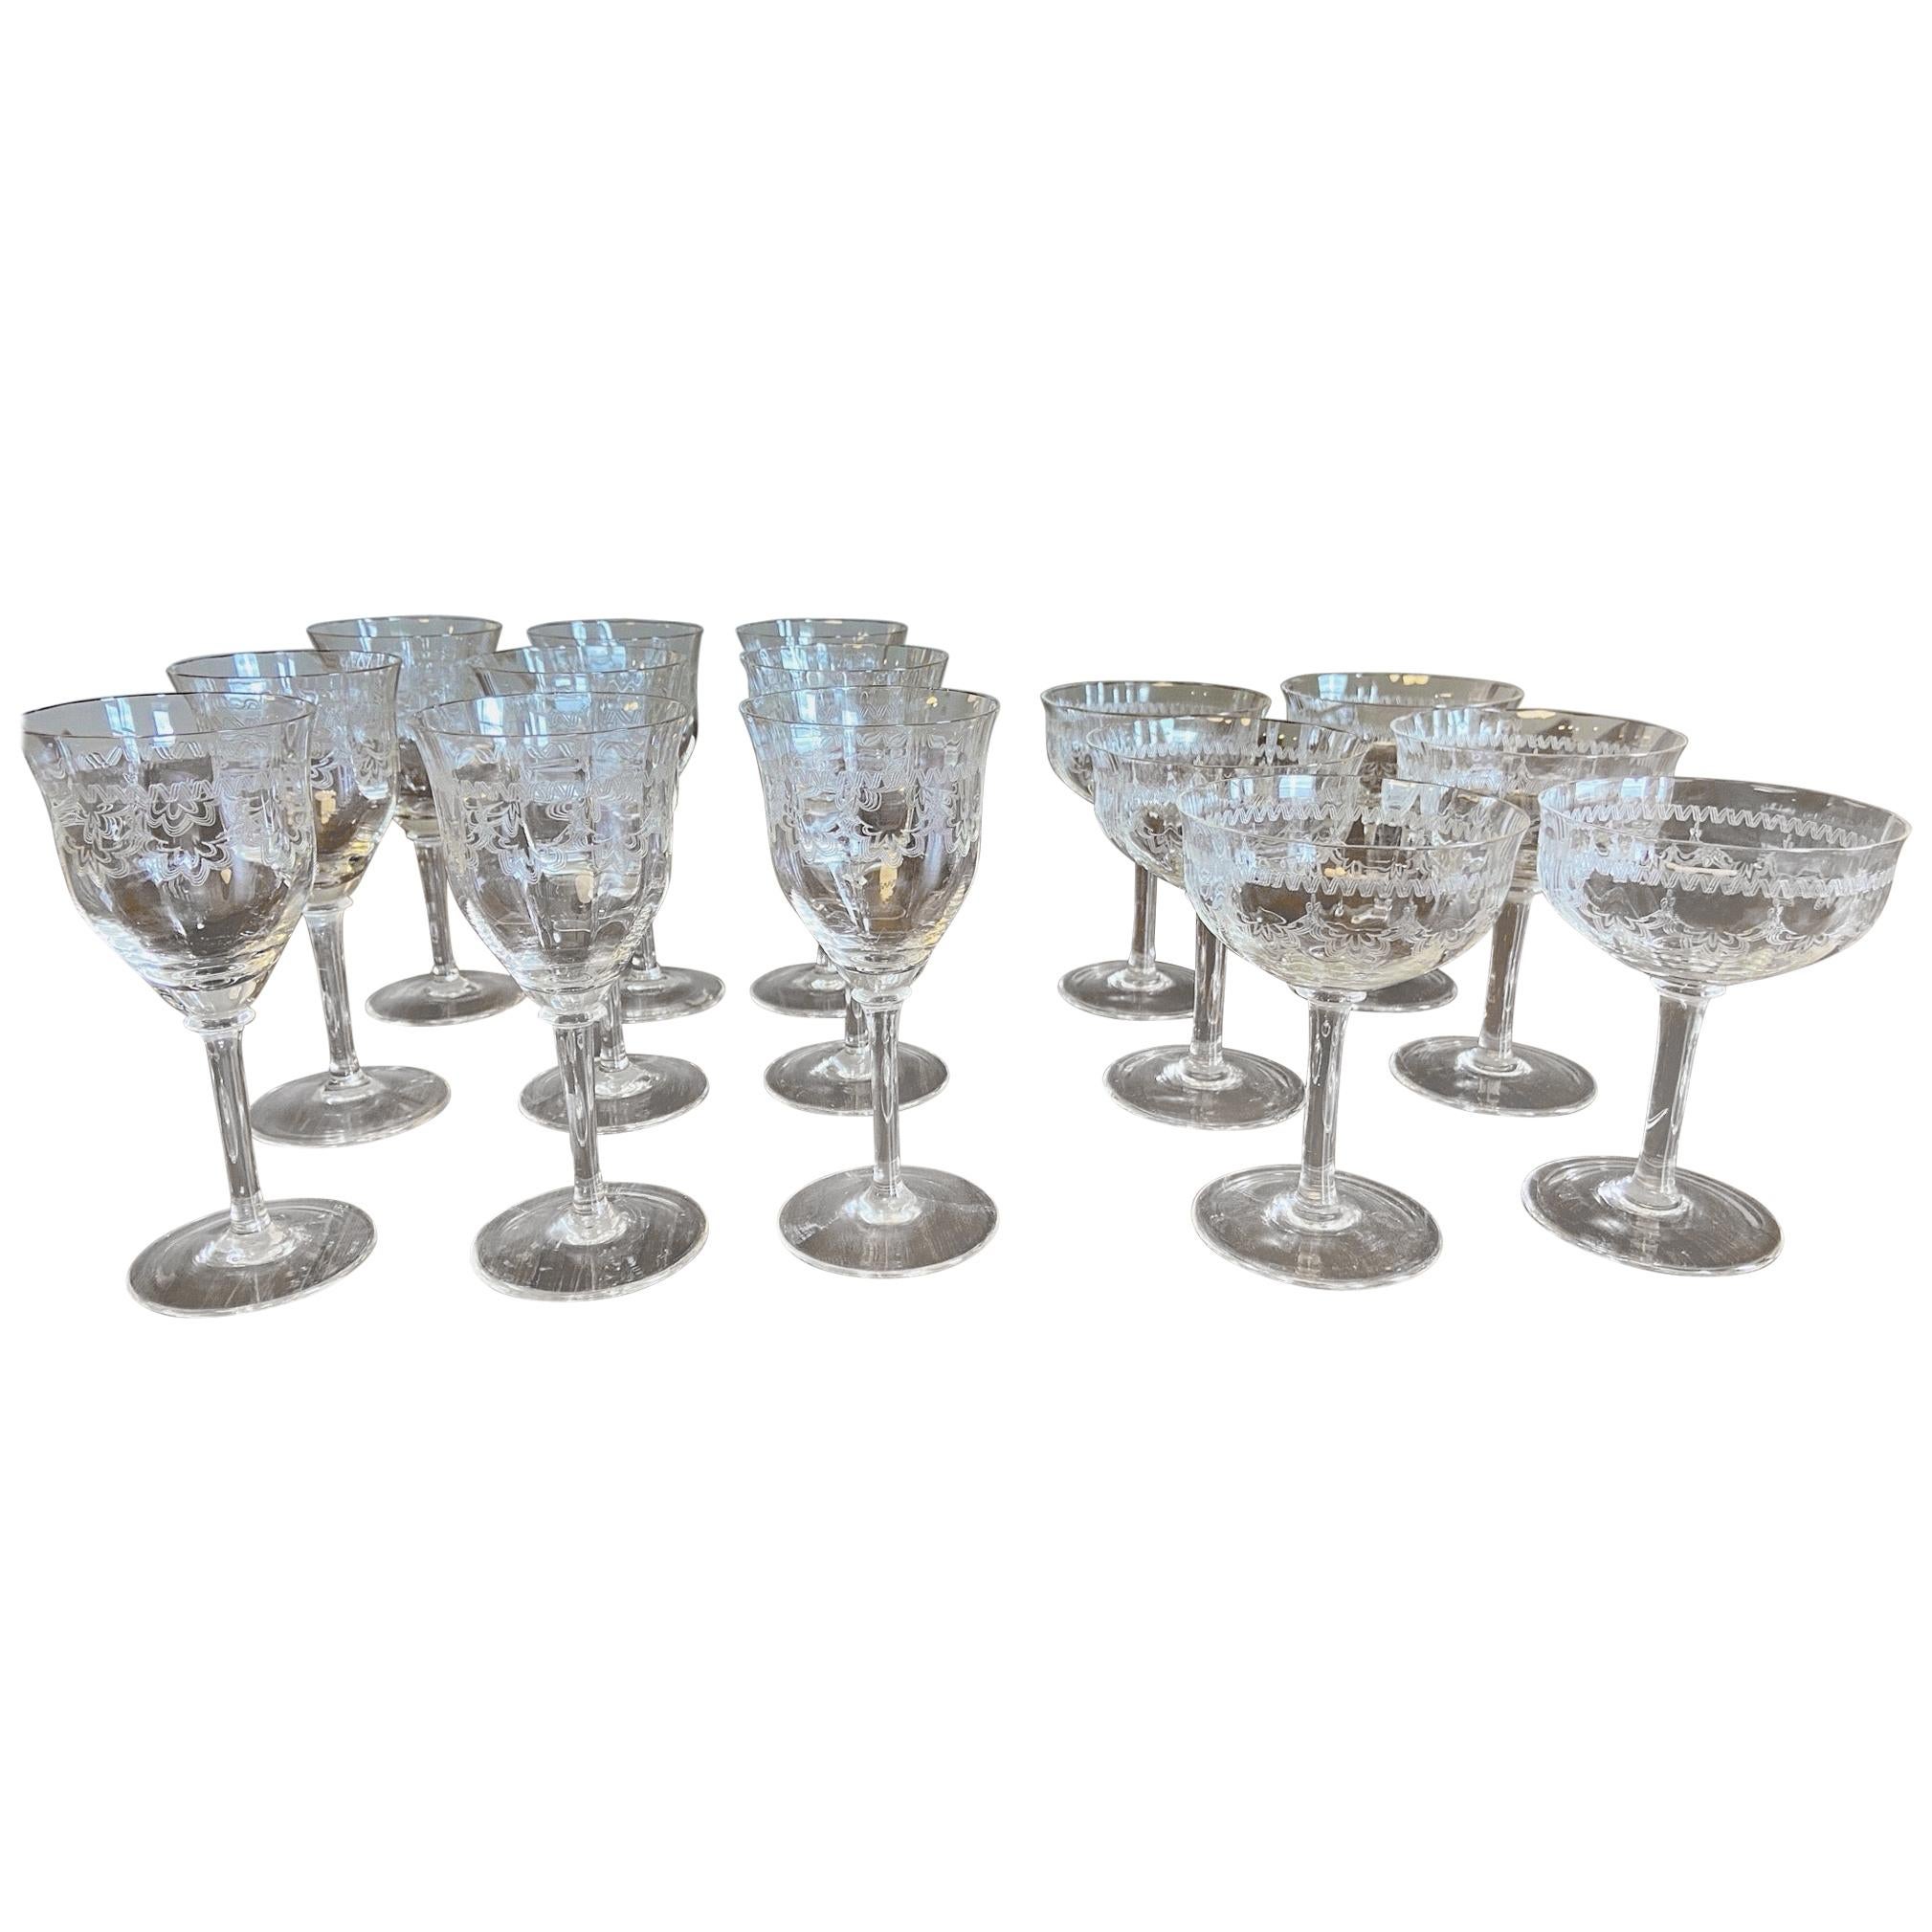 Rare Wine and Champagne Crystal Glasses from 1900-1920, handmade, mouth-blown